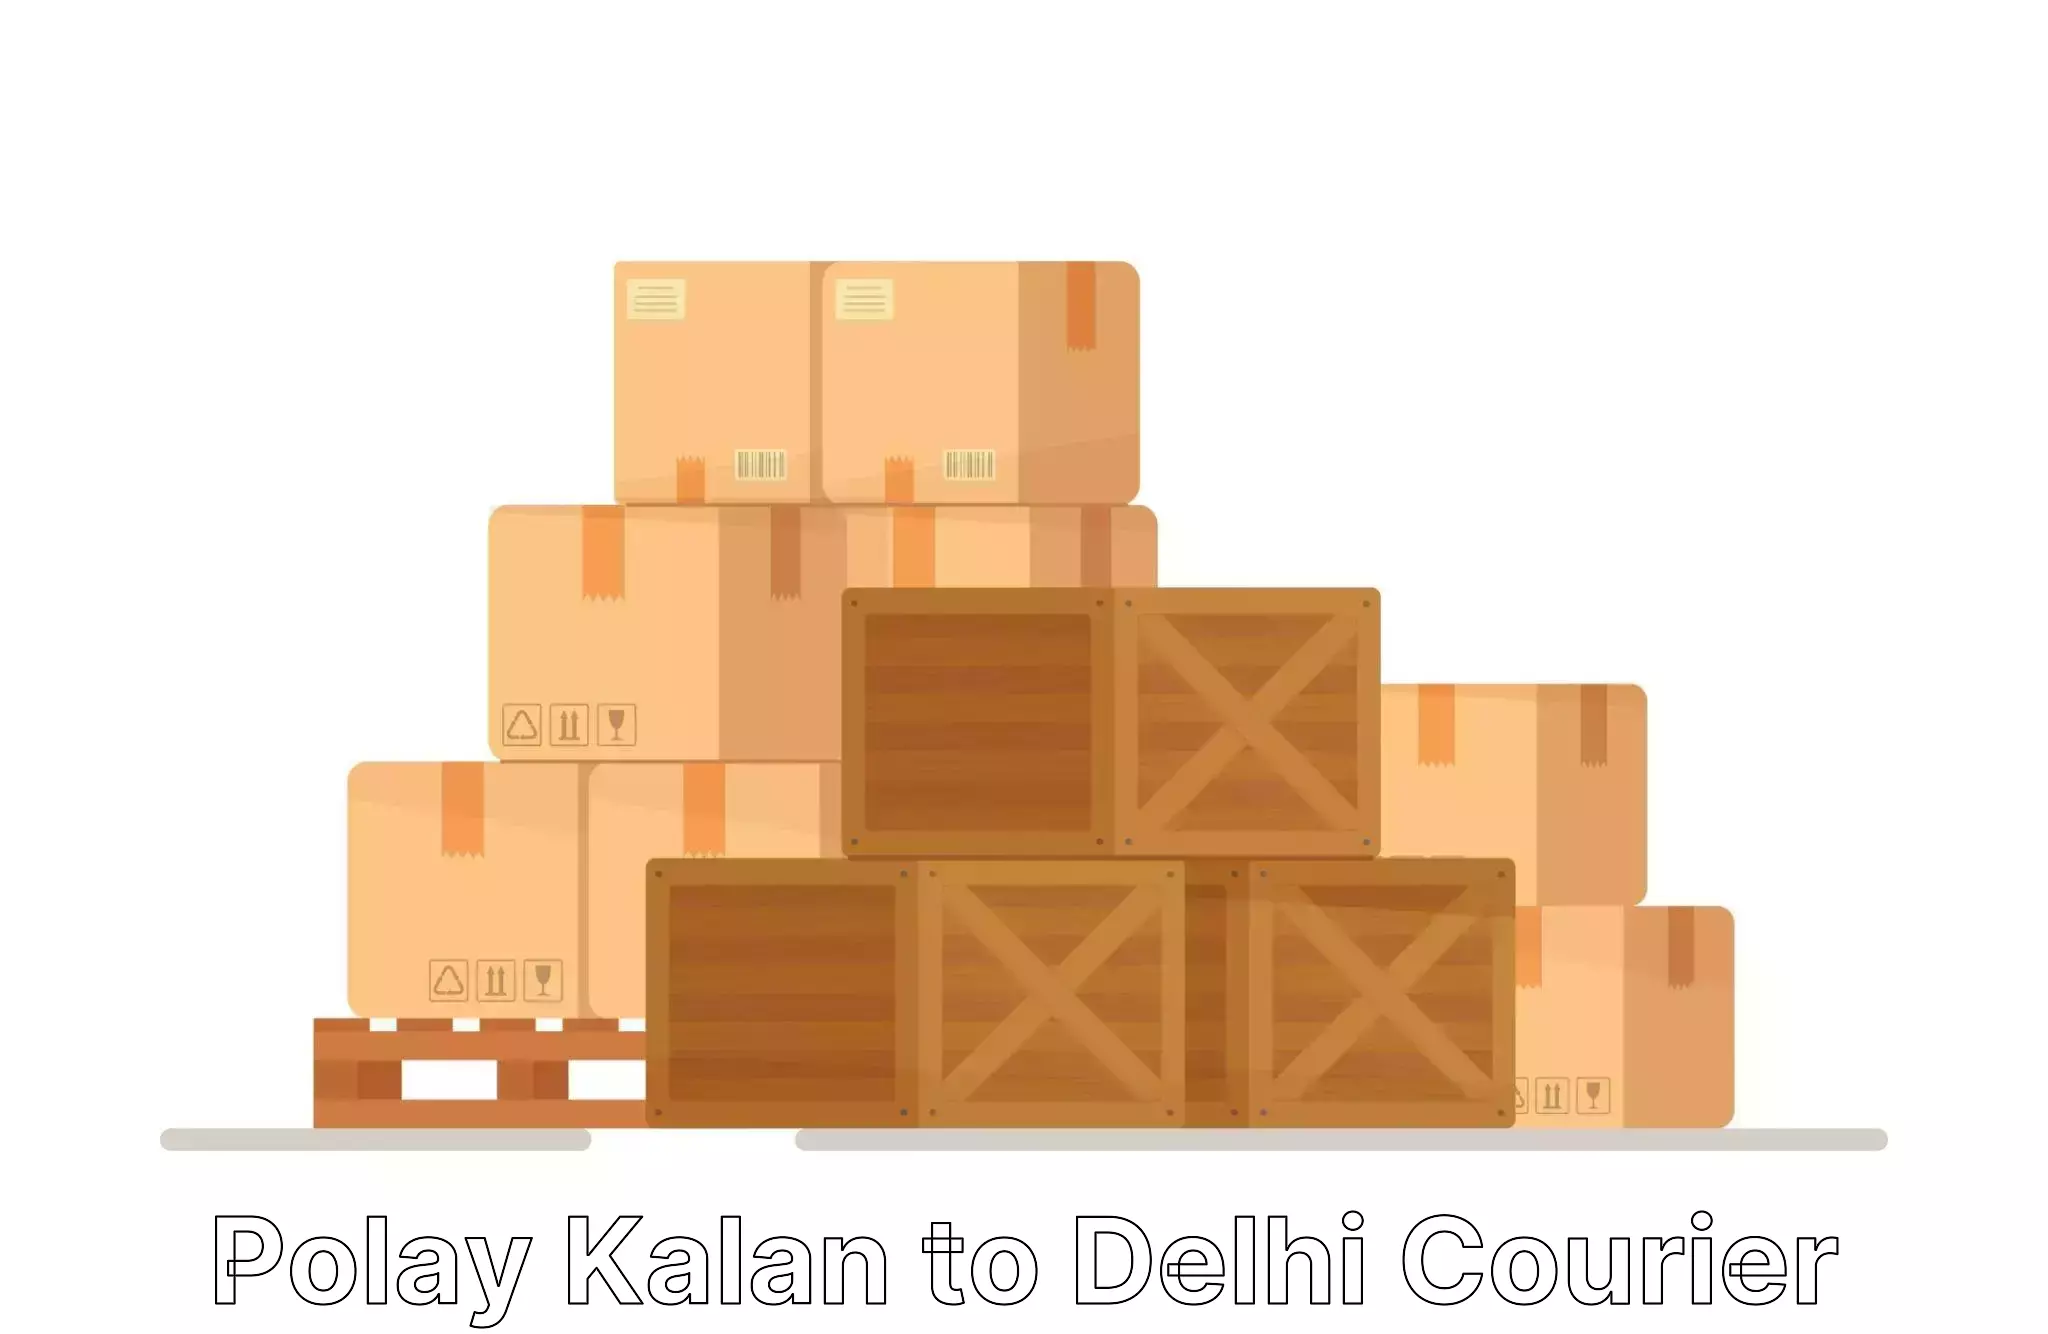 Long-distance moving services Polay Kalan to University of Delhi